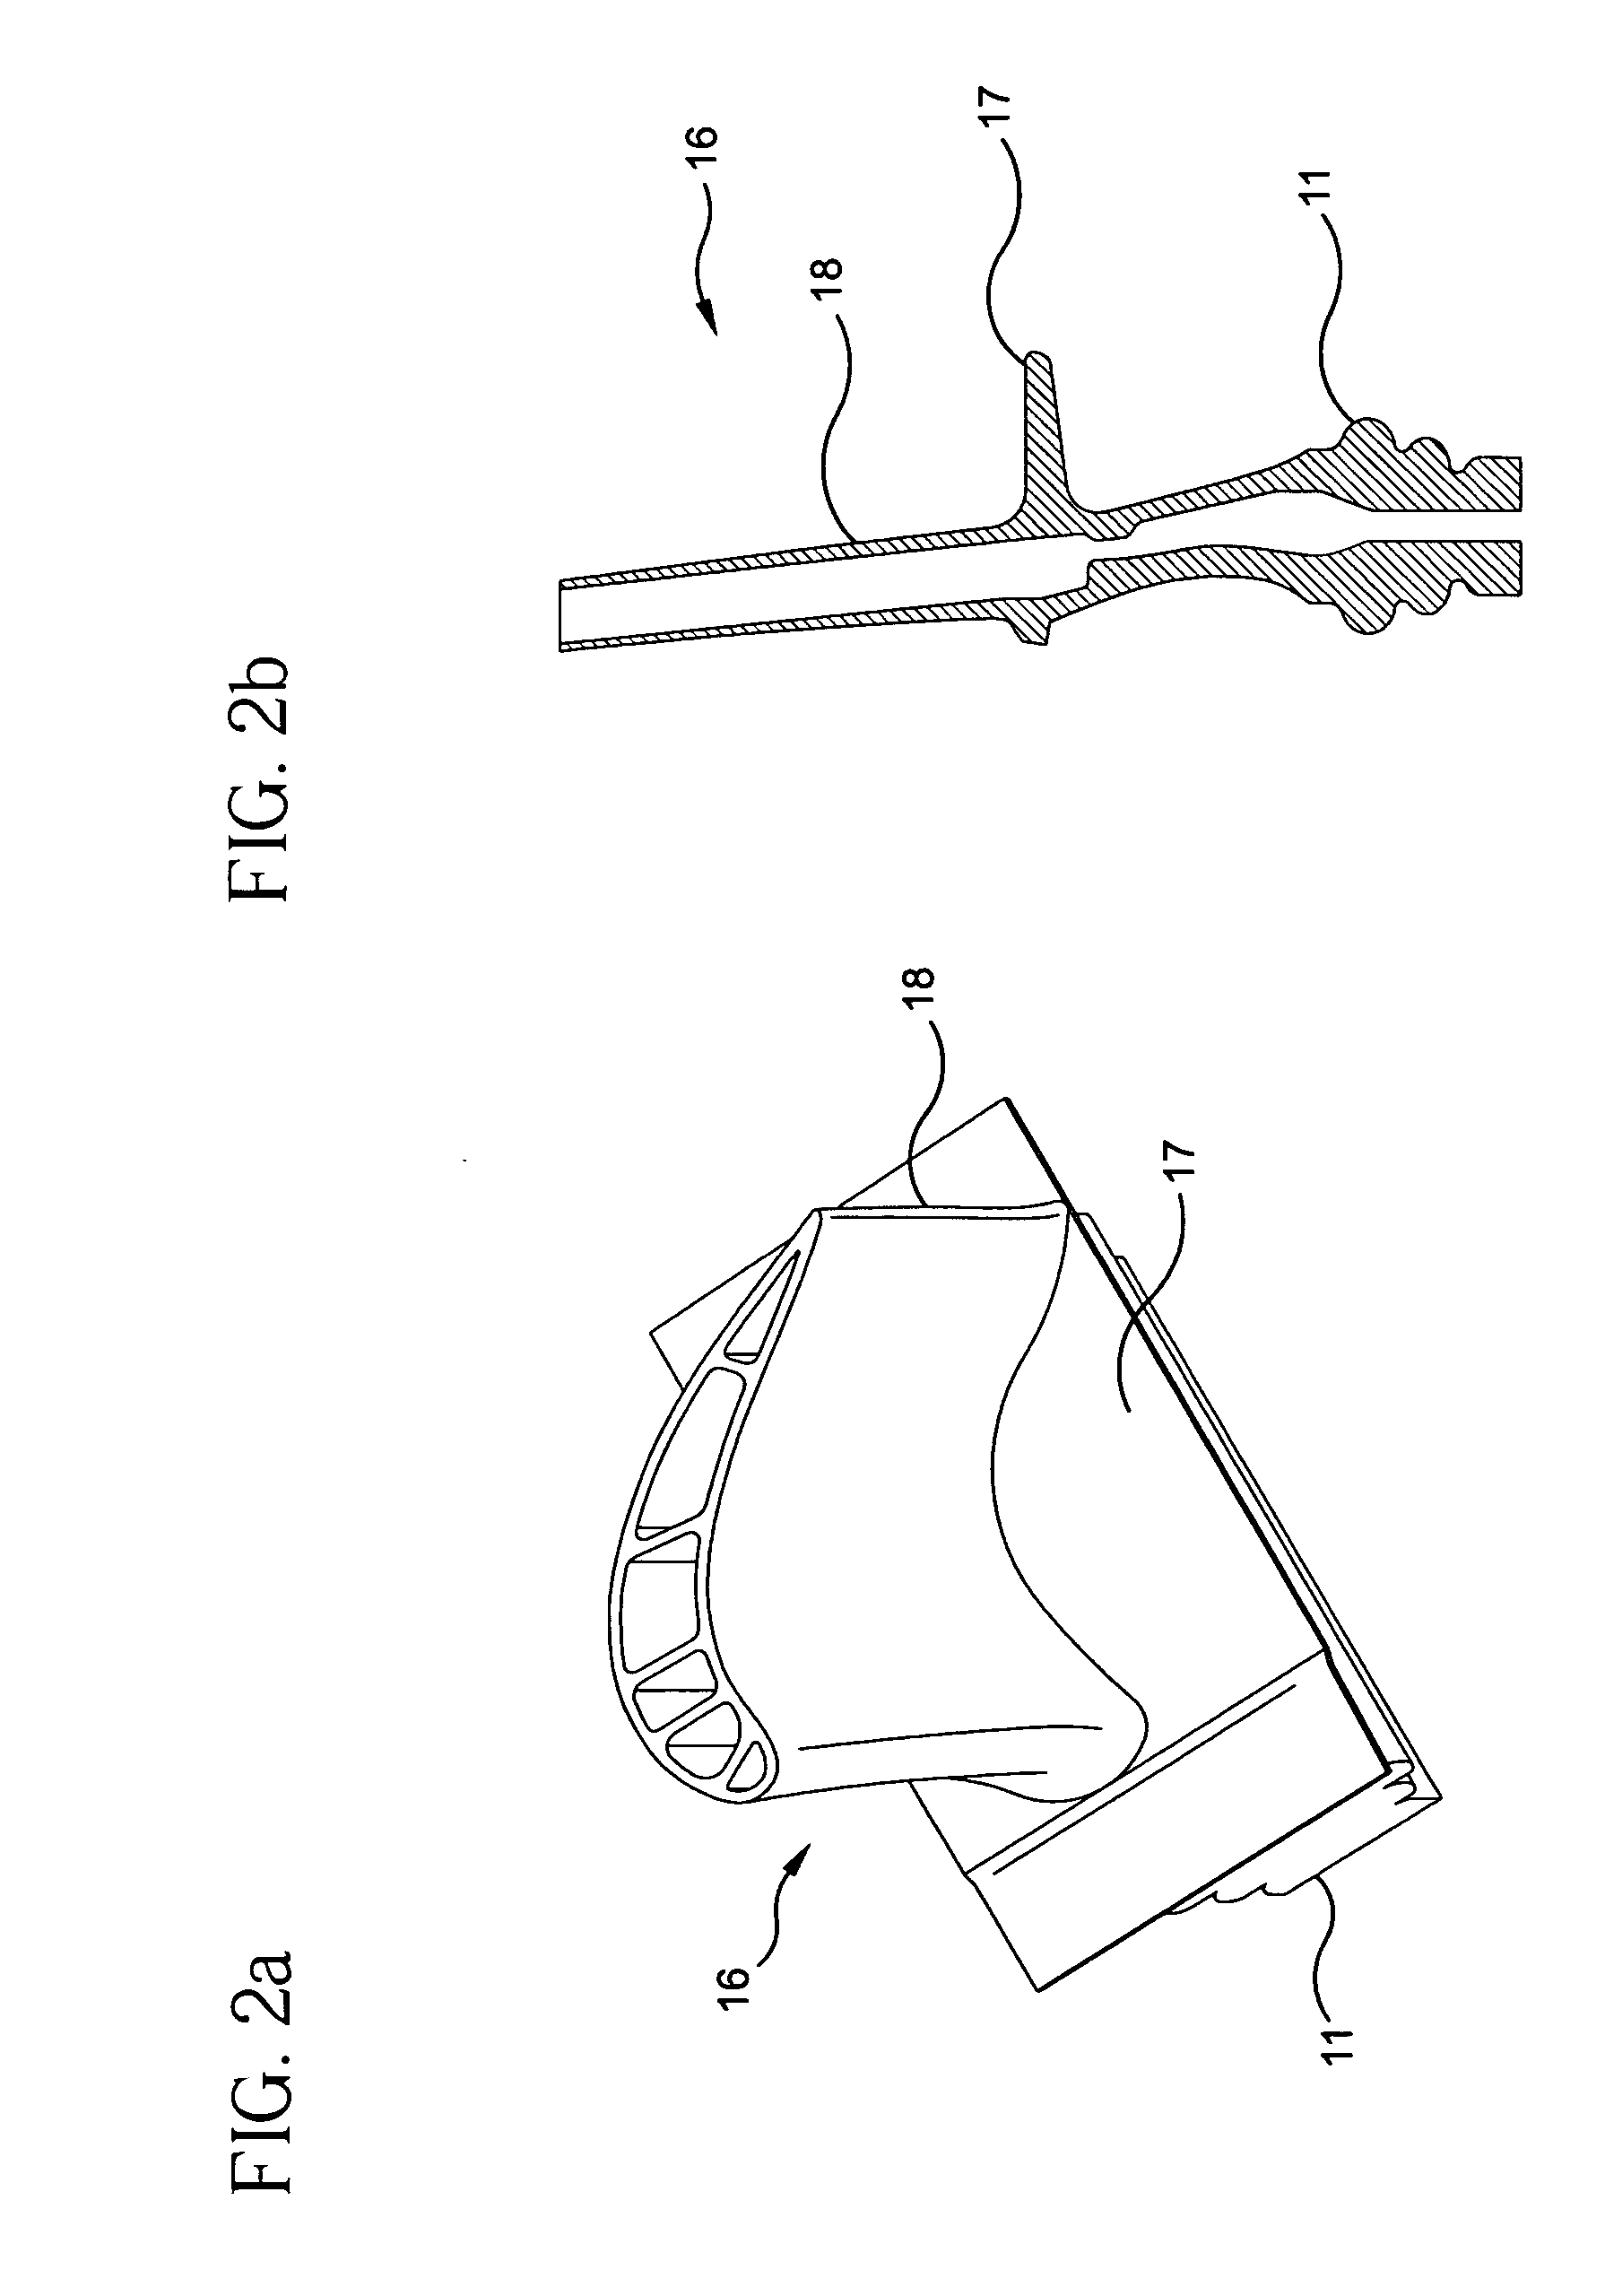 Turbine blade and a method of manufacturing and repairing a turbine blade